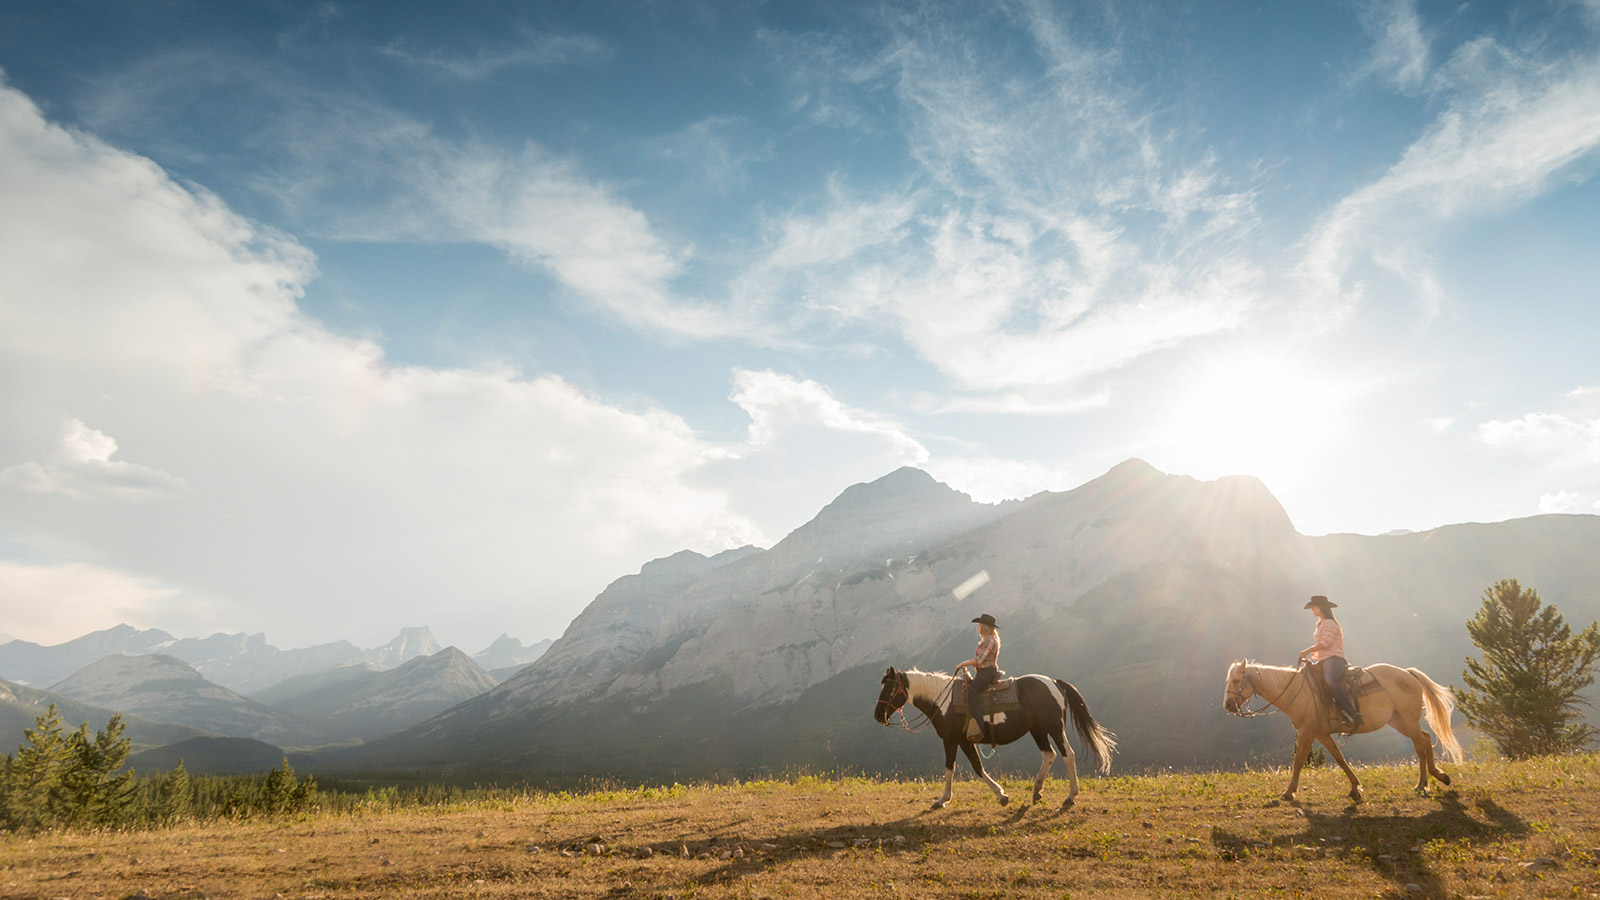 People horseback riding in the mountains